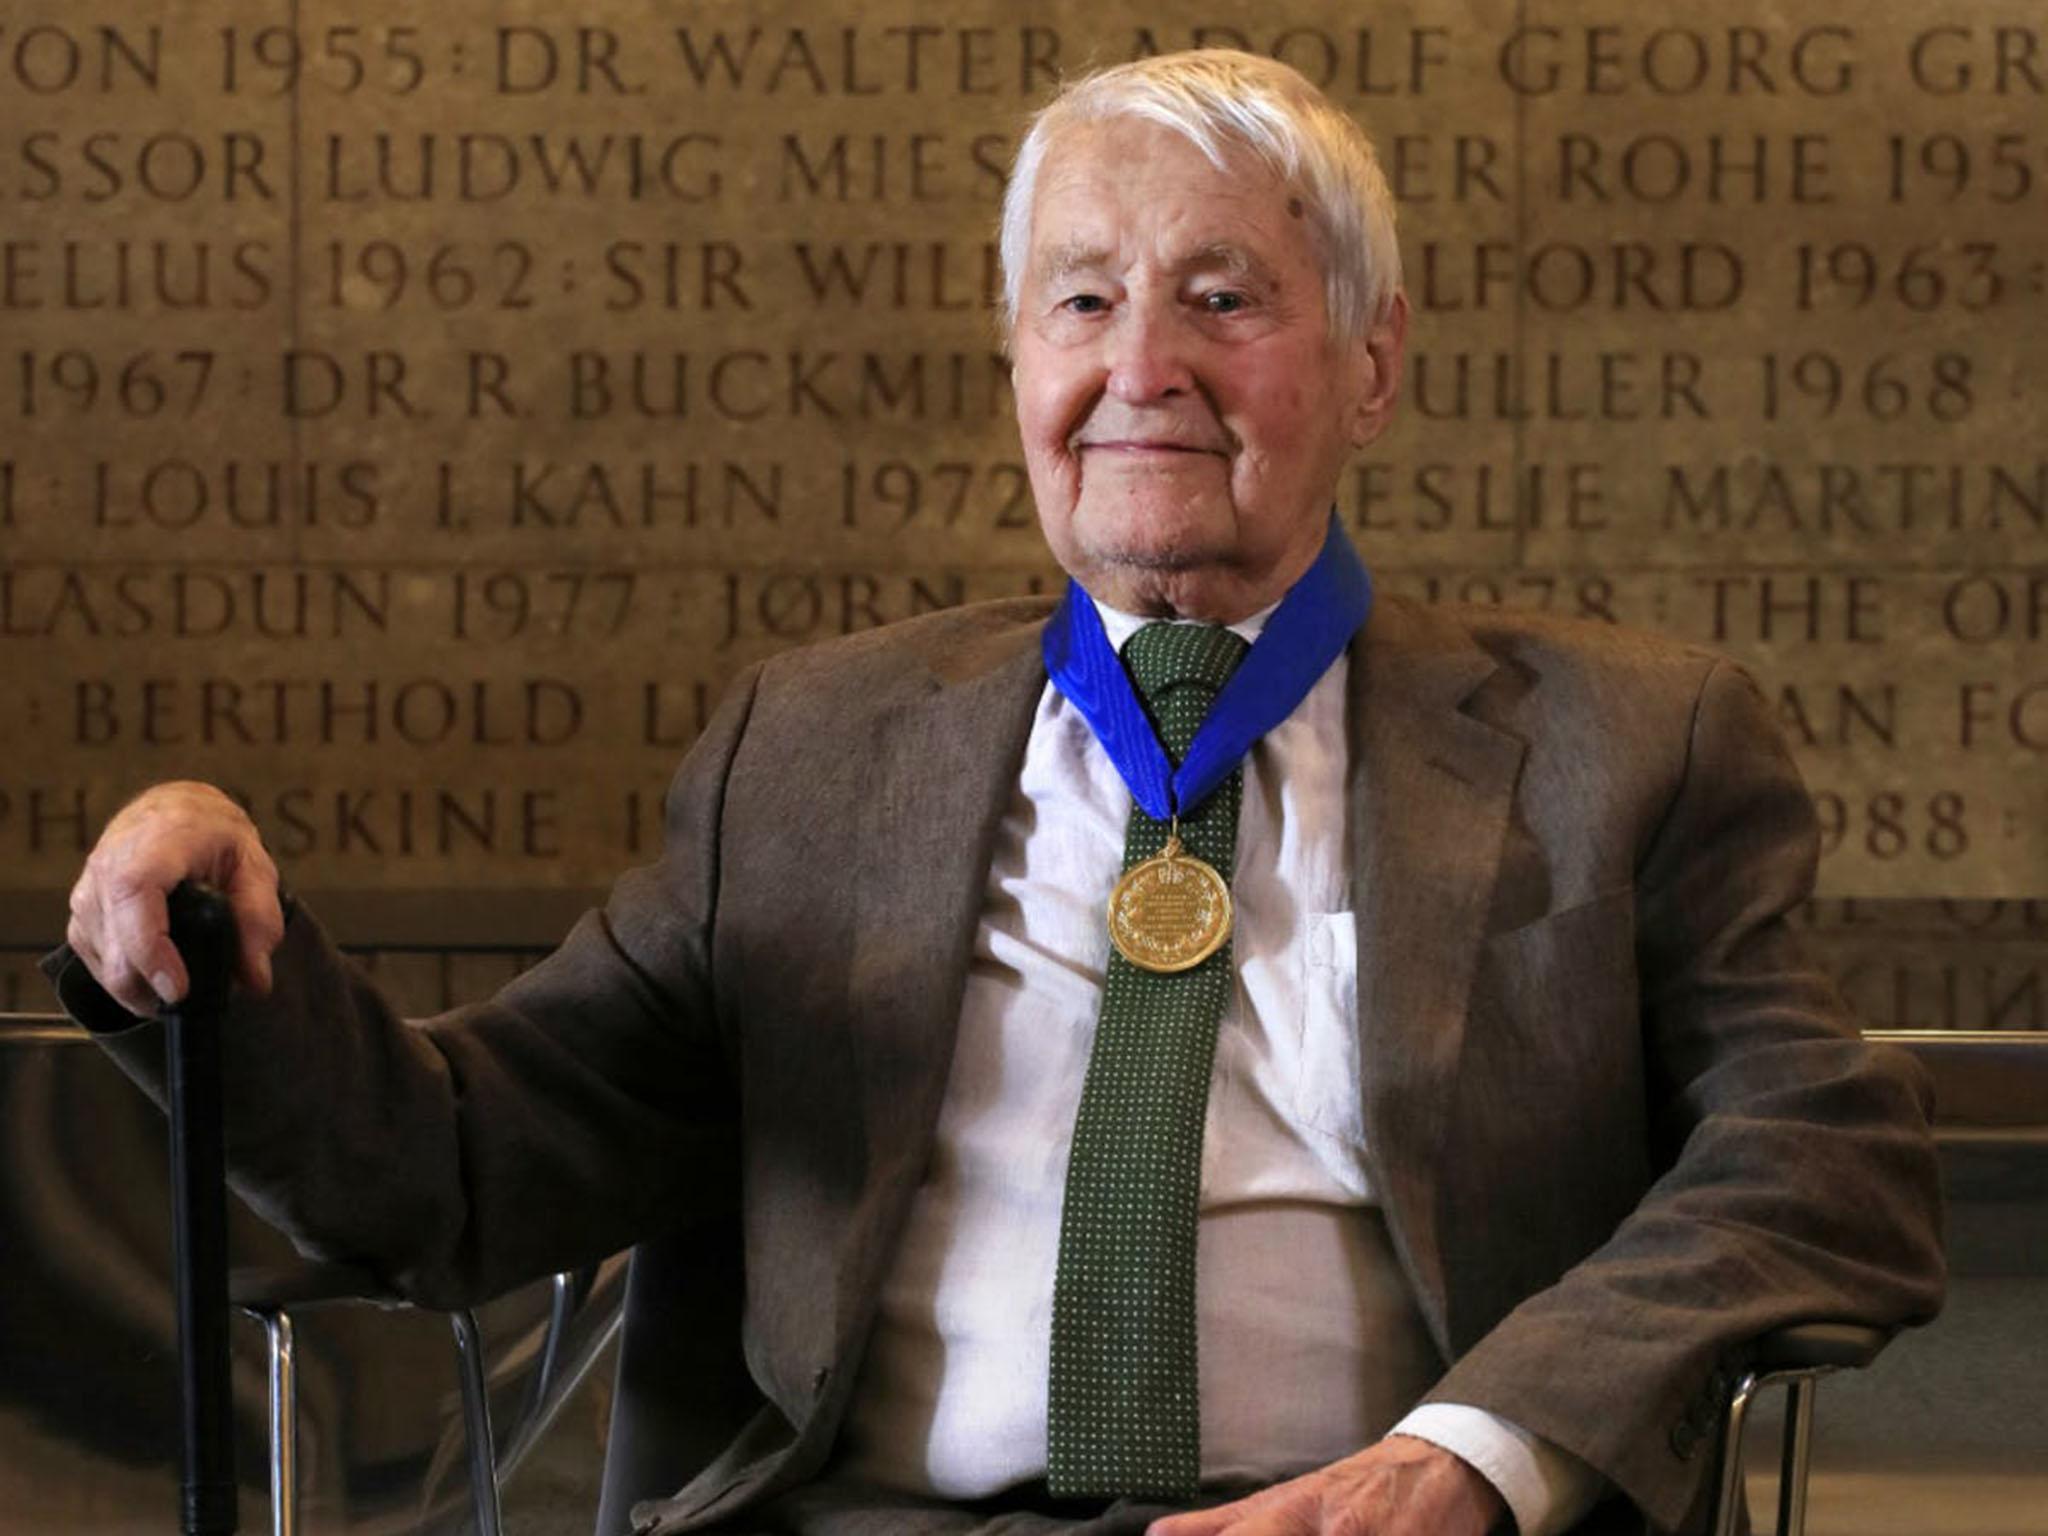 Brown was awarded Britain’s highest architectural honour, the Riba Royal Gold Medal in October